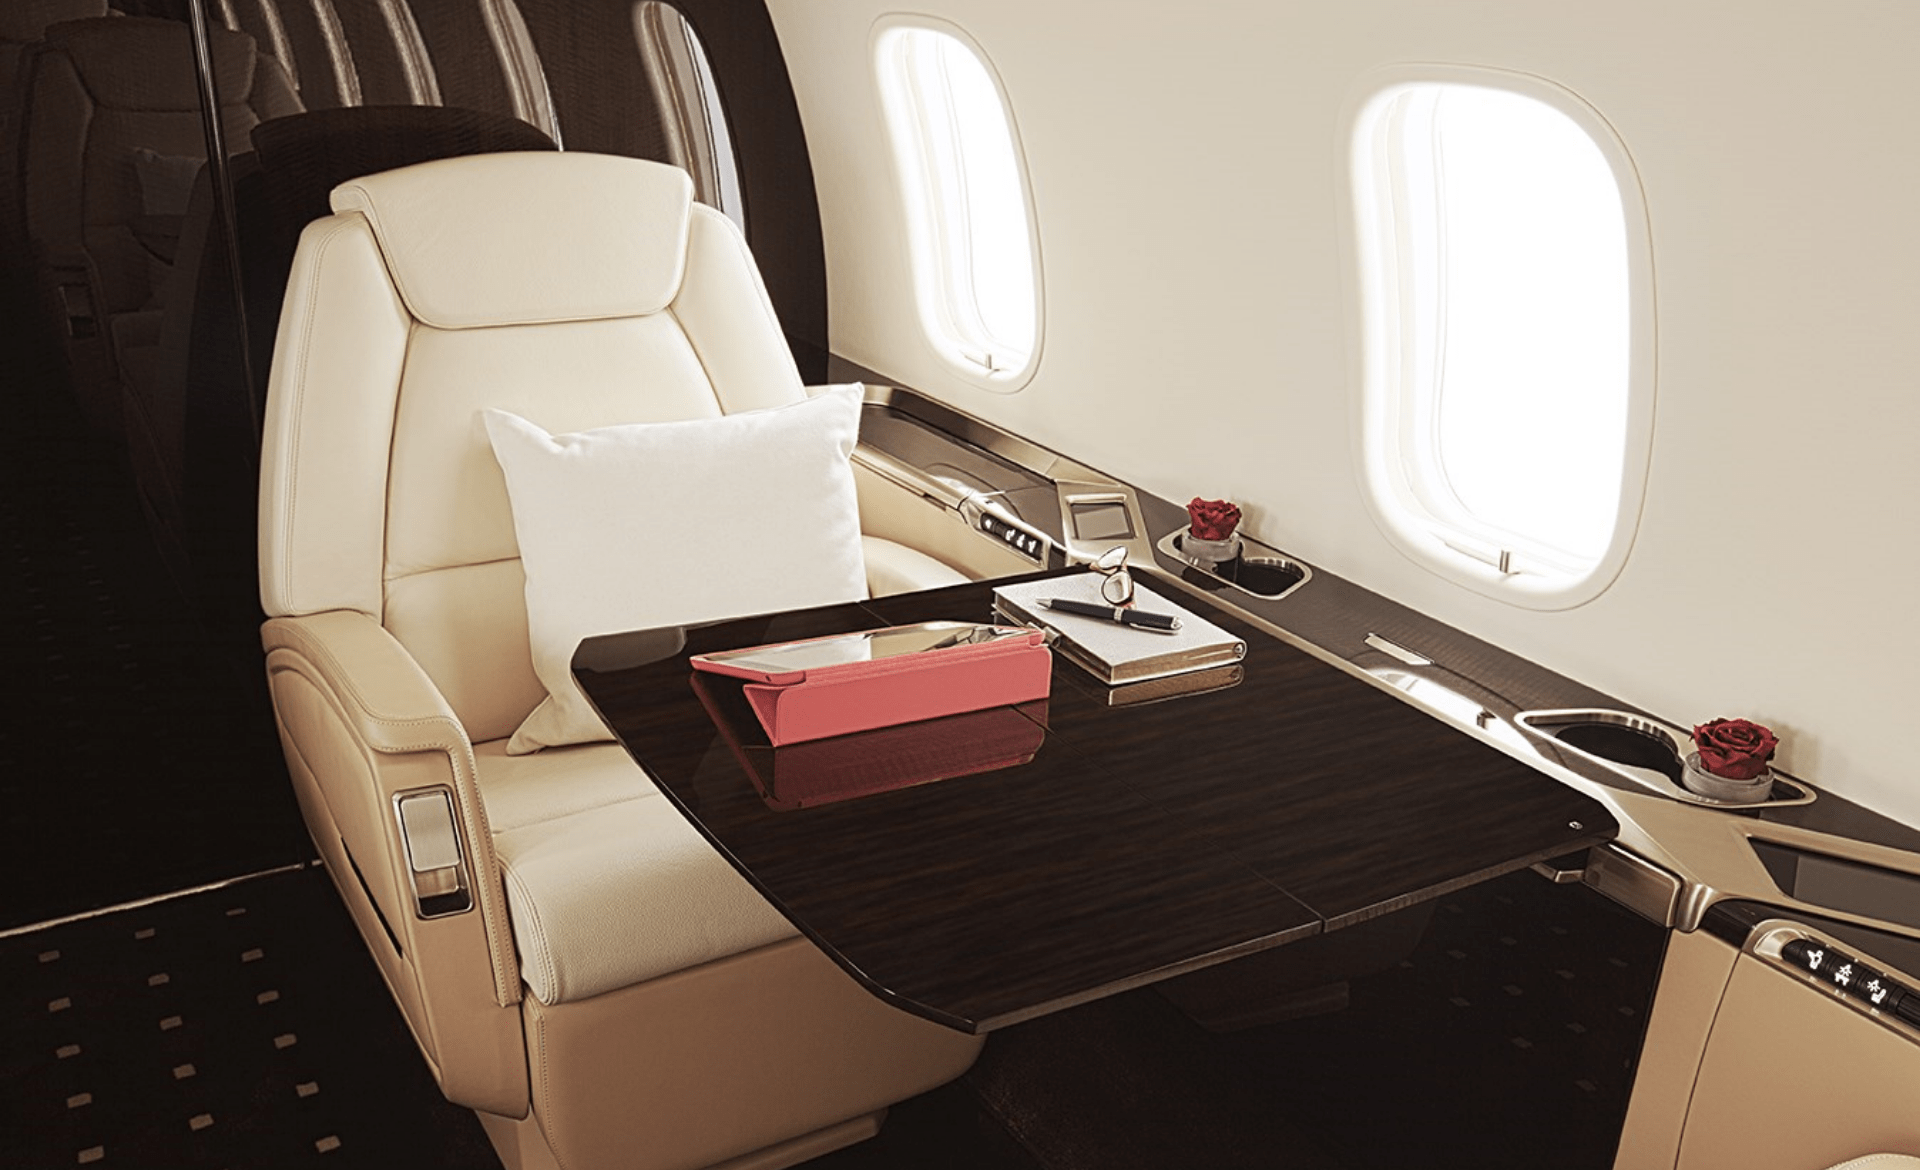 The World’s 5 Most Expensive Private Jets